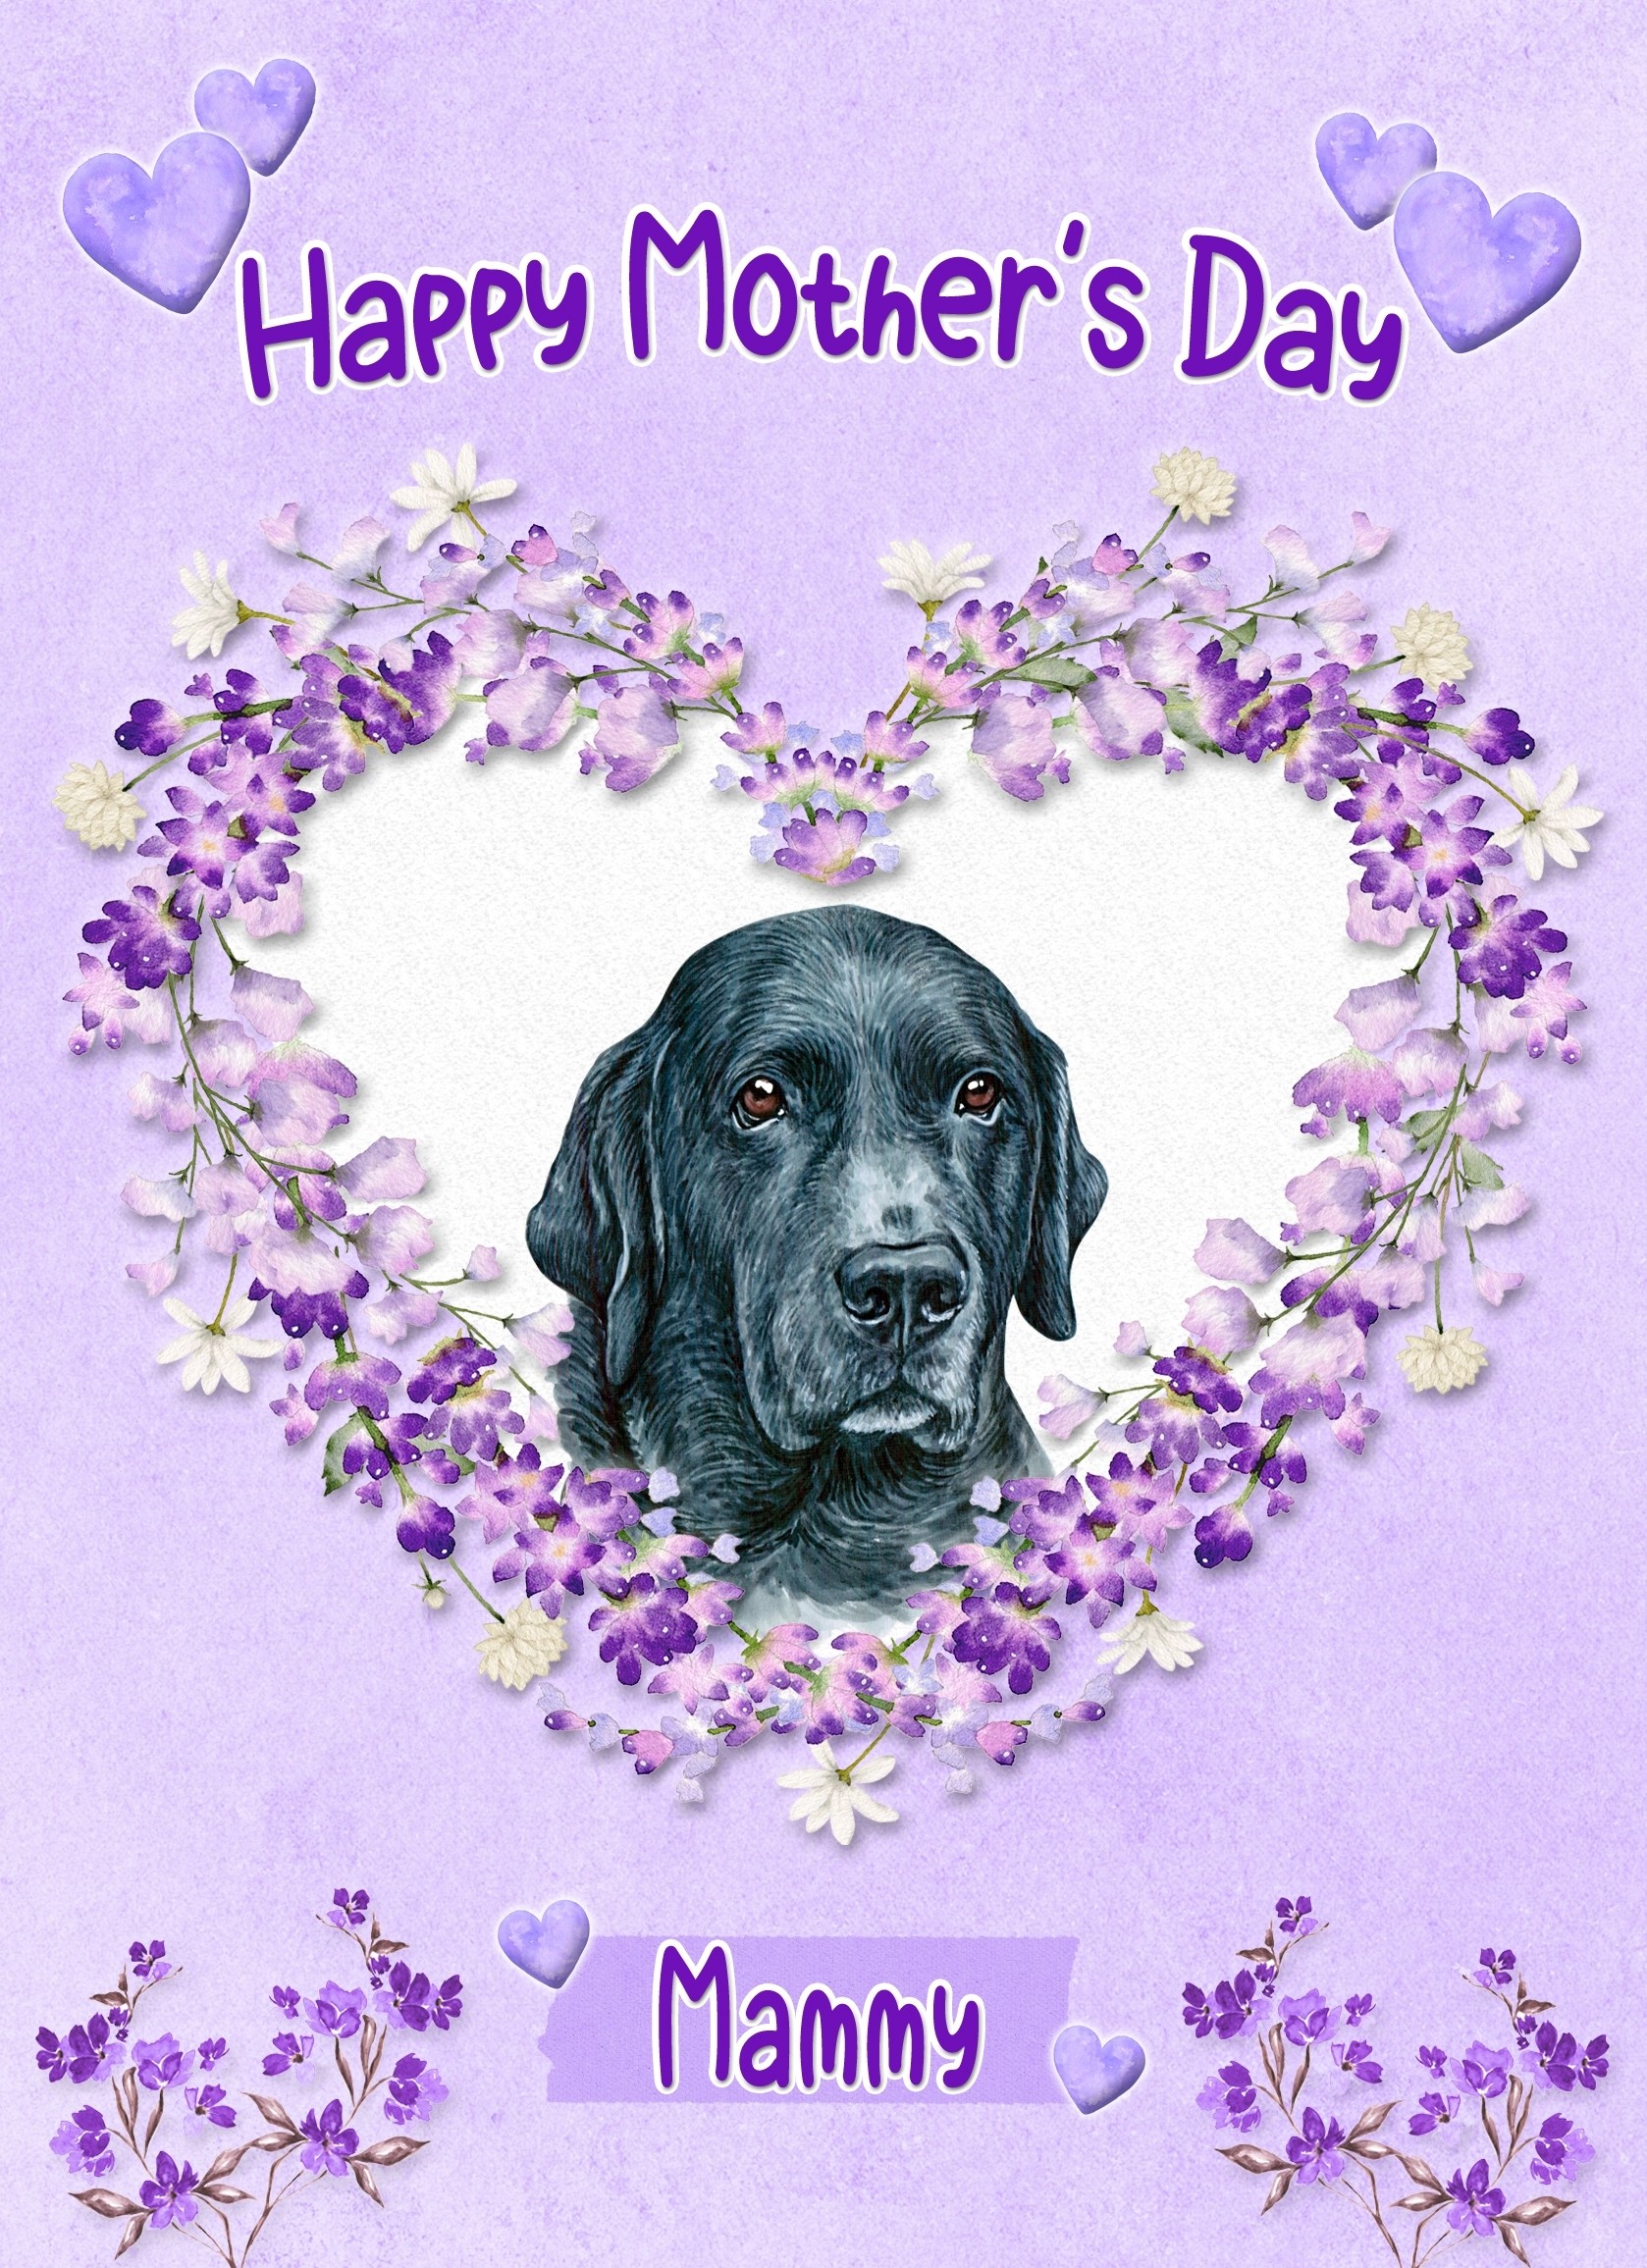 Black Labrador Dog Mothers Day Card (Happy Mothers, Mammy)